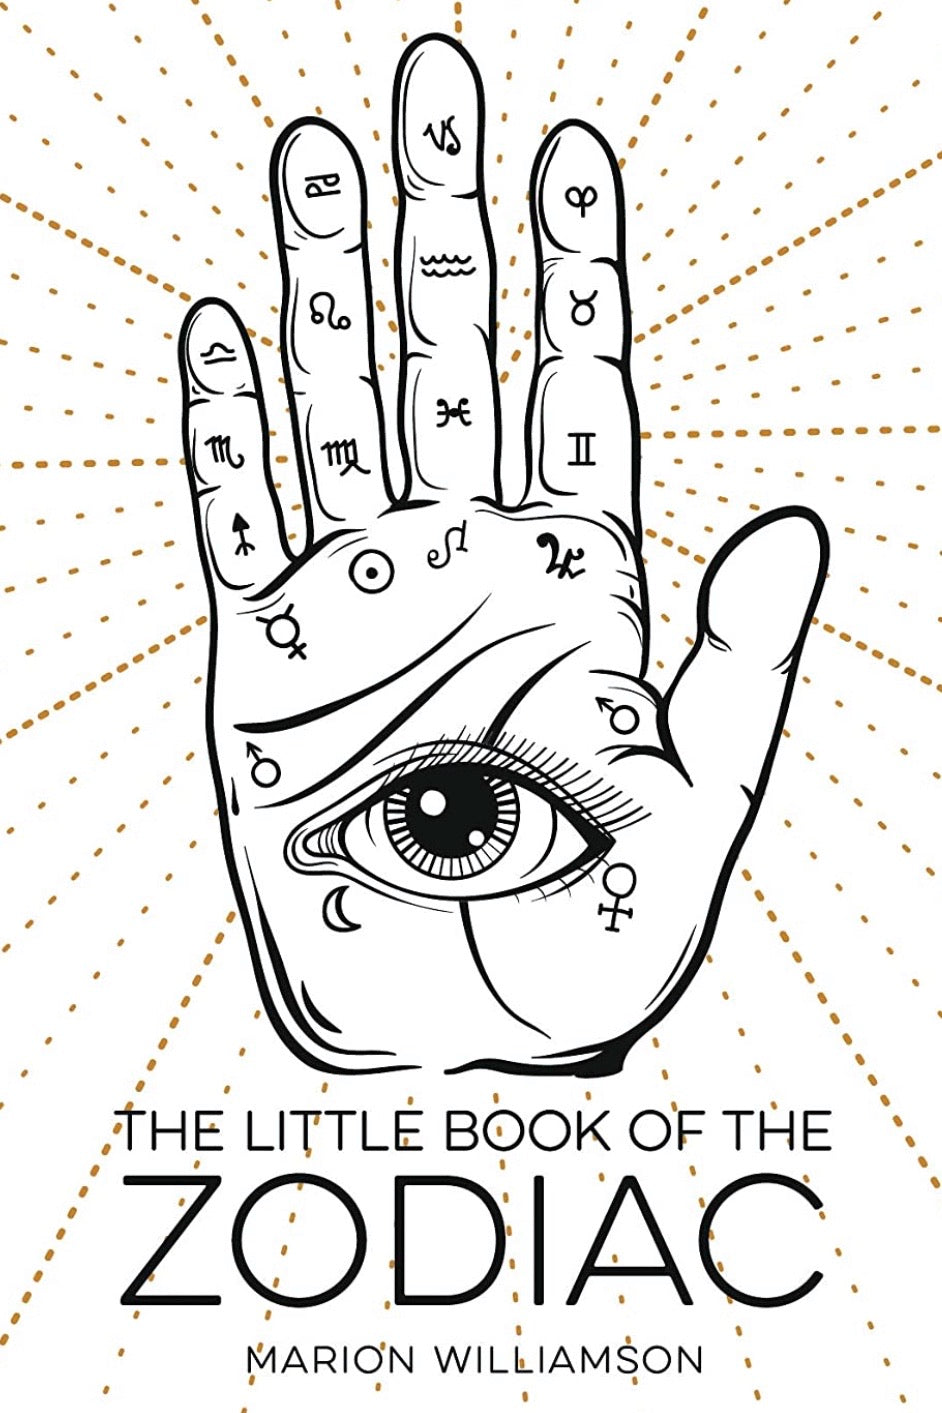 THE LITTLE BOOK OF THE ZODIAC